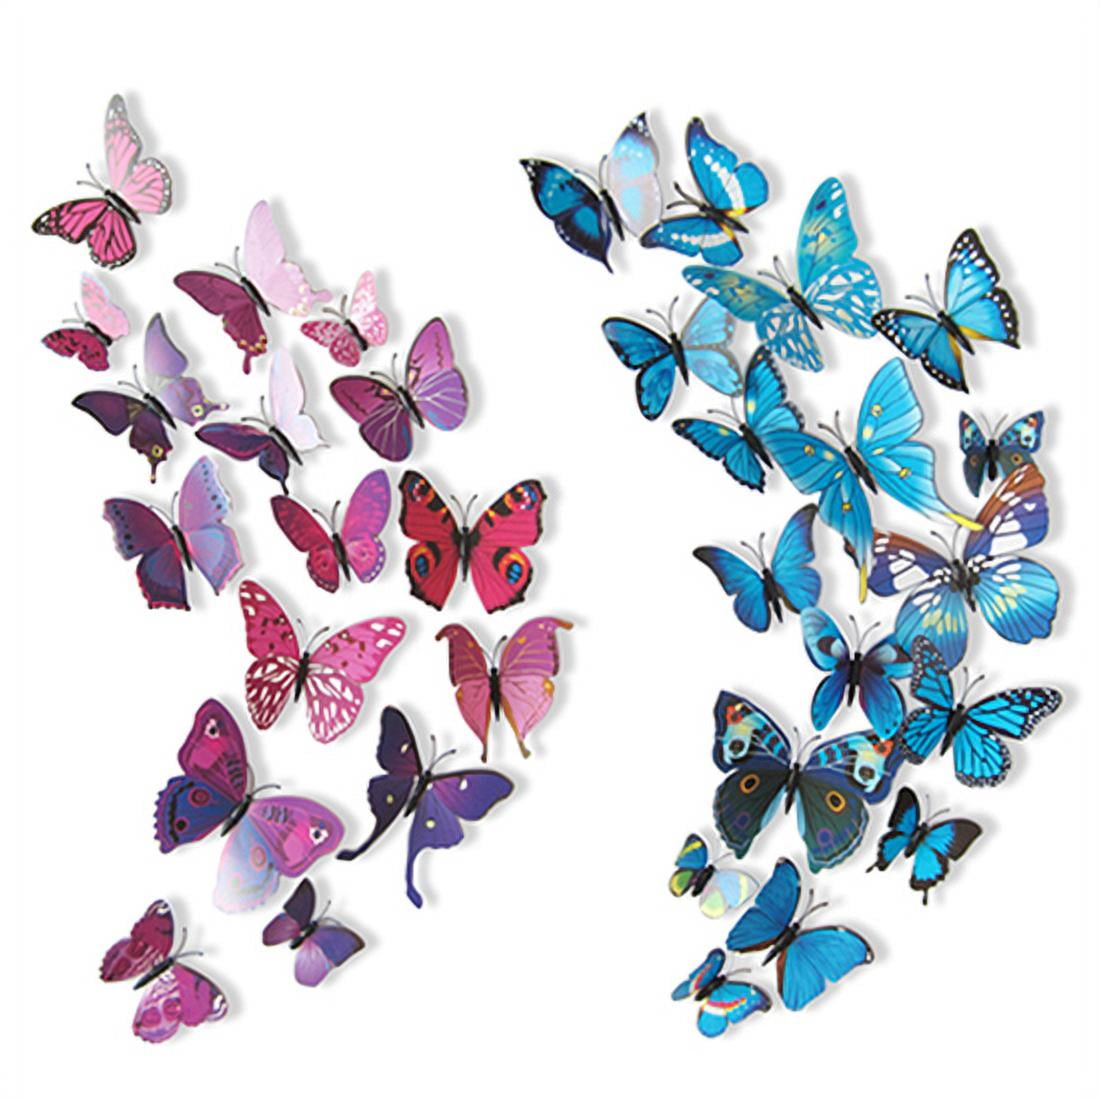 24 Pack 3D Colorful Artificial Butterflies Home Decorations with Magnet 7CM